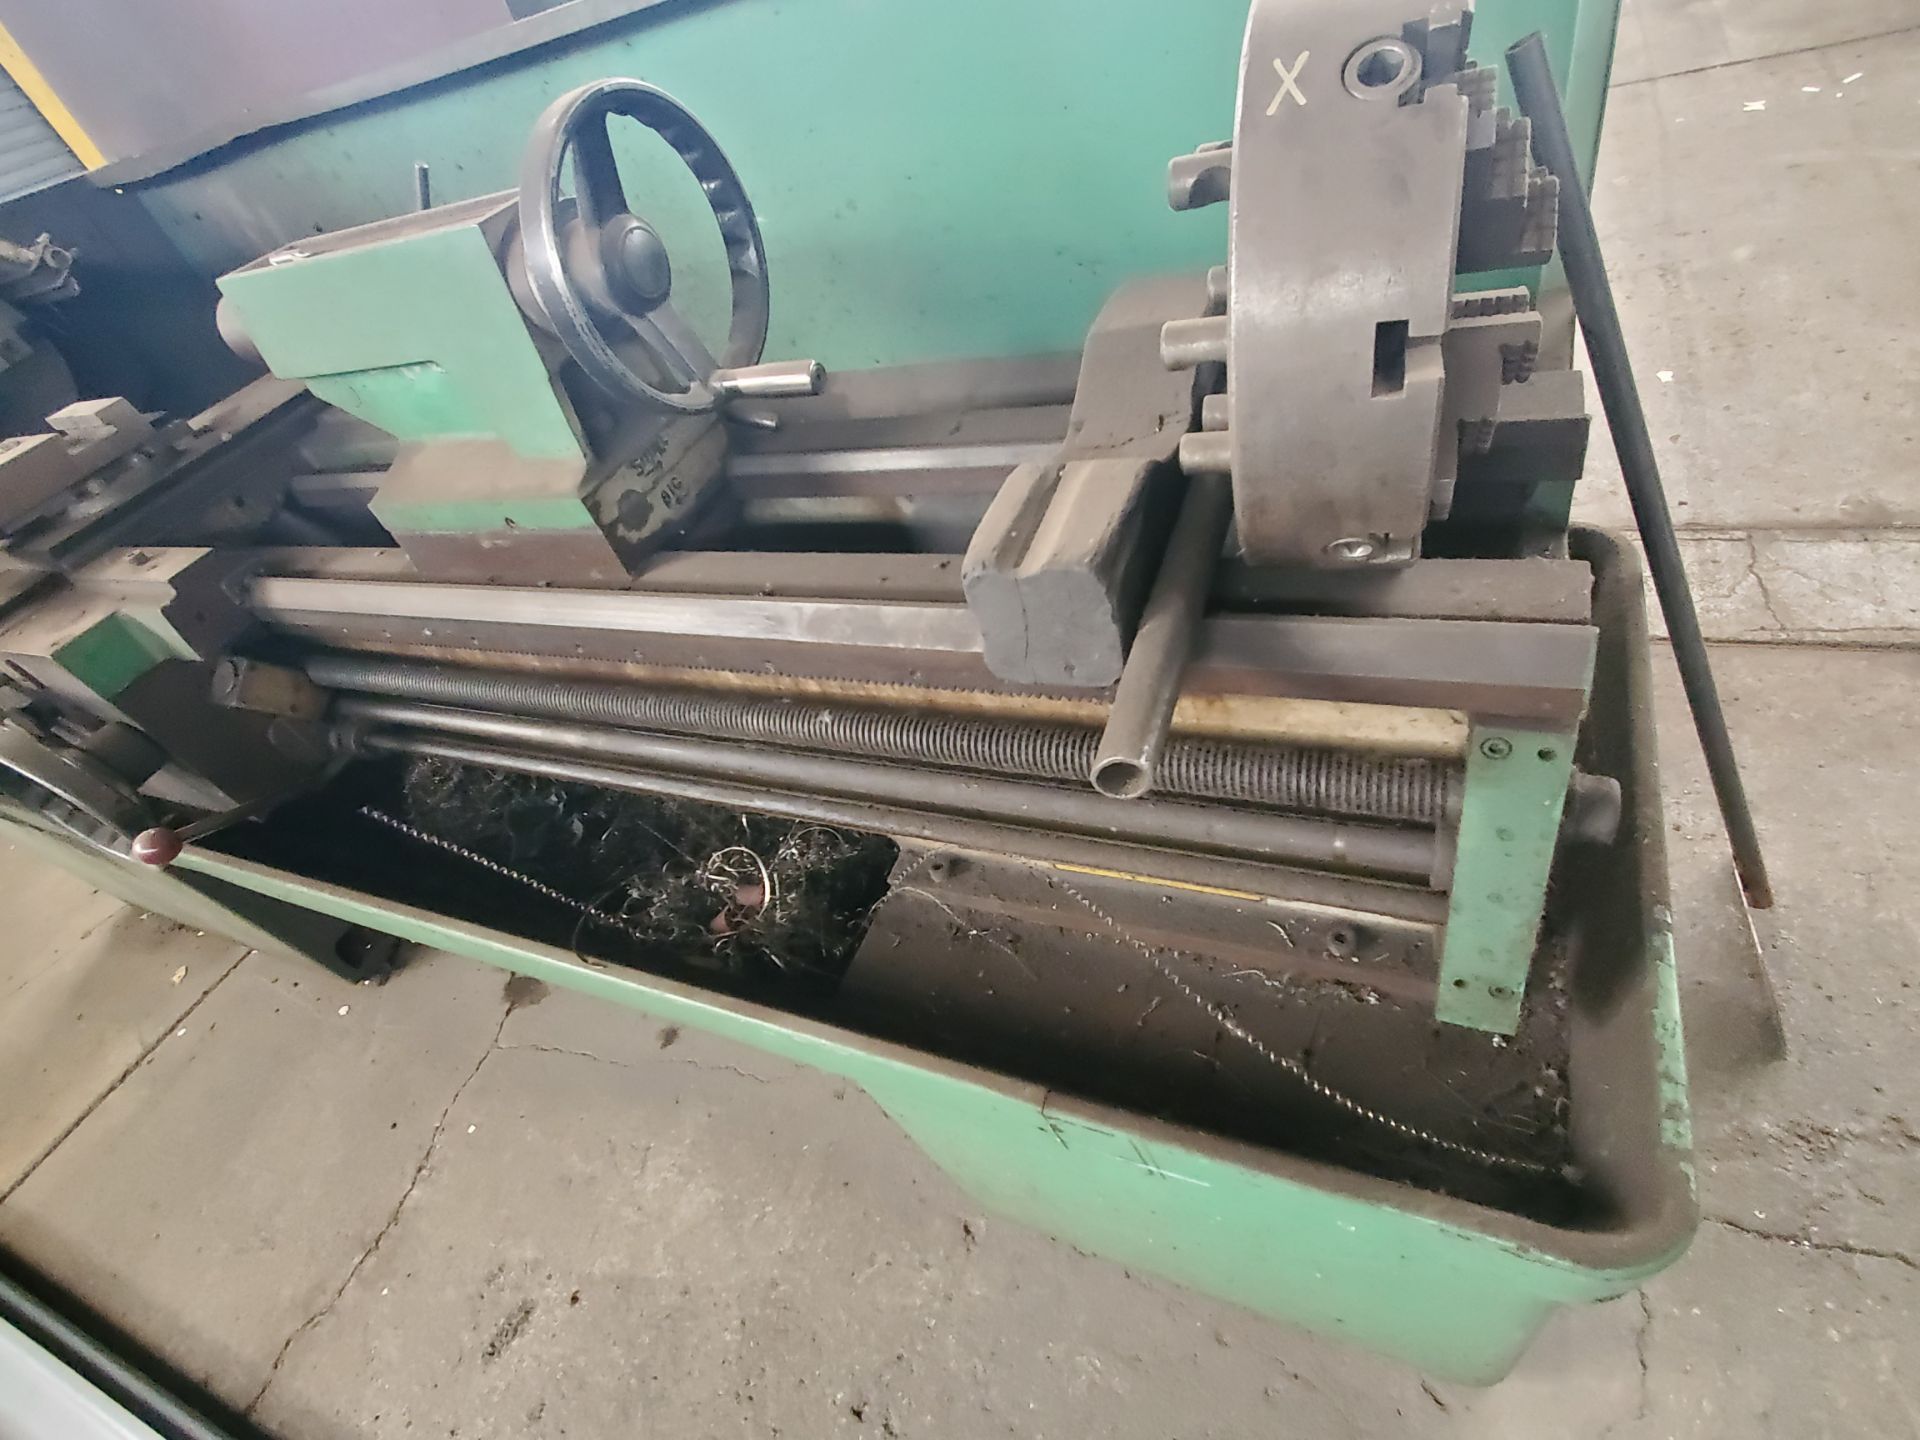 17" x 54" Clausing Colchester Engine Lathe - Image 11 of 14